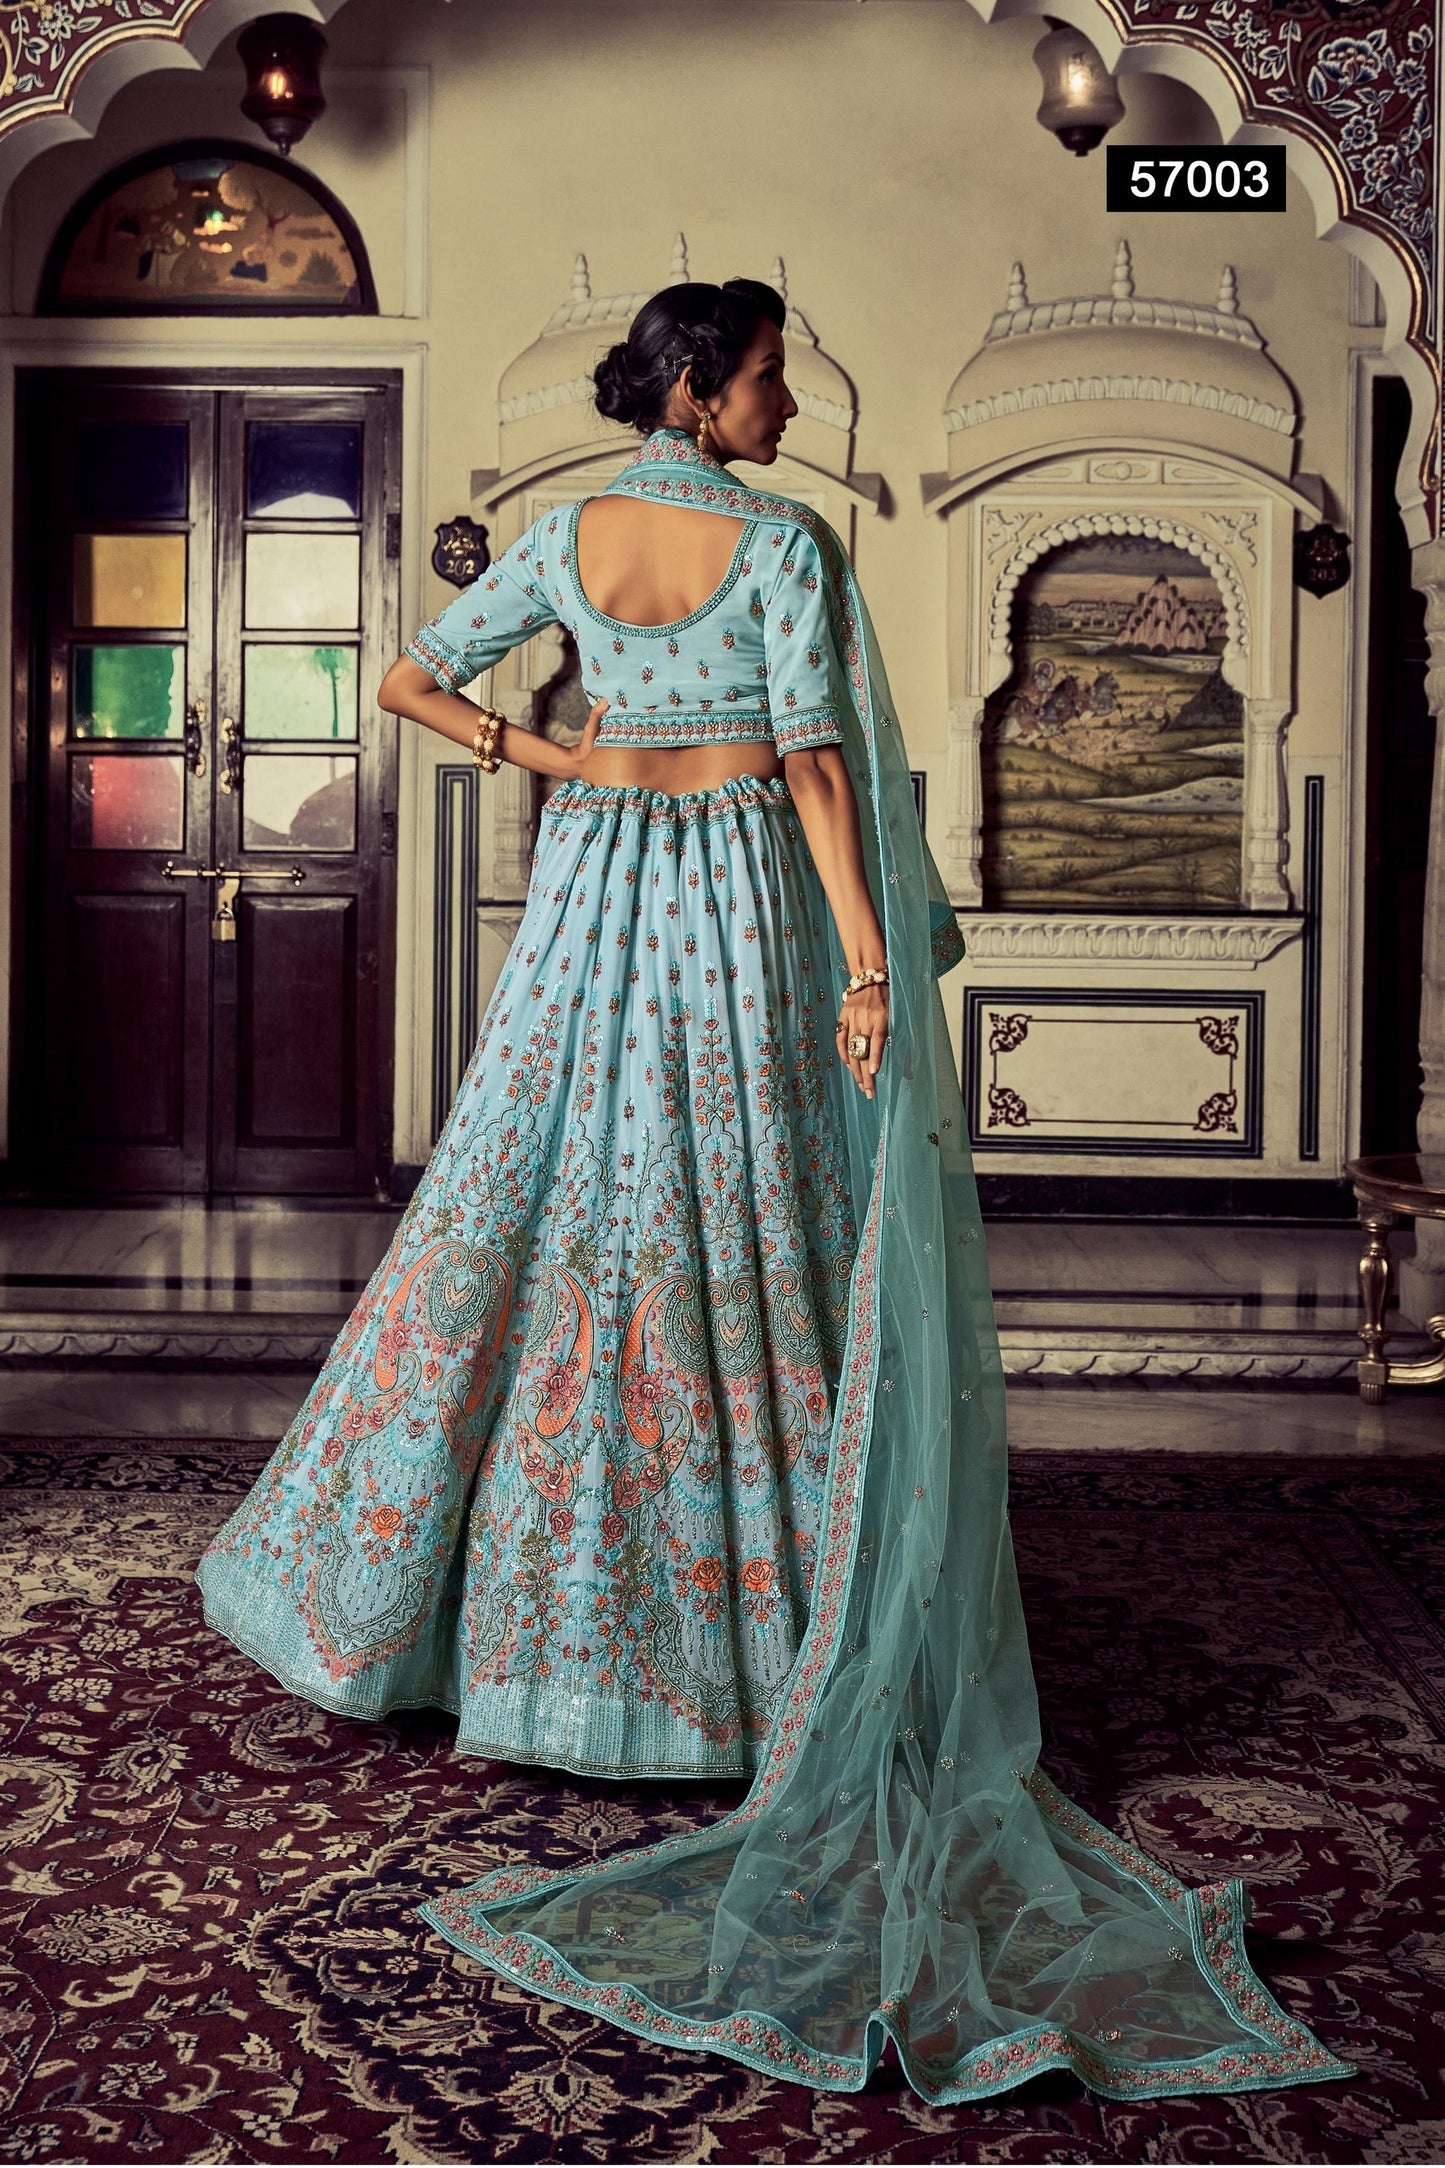 Turquoise Pakistani Georgette Lehenga Choli For Indian Festivals & Weddings - Sequence Embroidery Work, Thread Embroidery Work, Zari Work, Zarkan Work